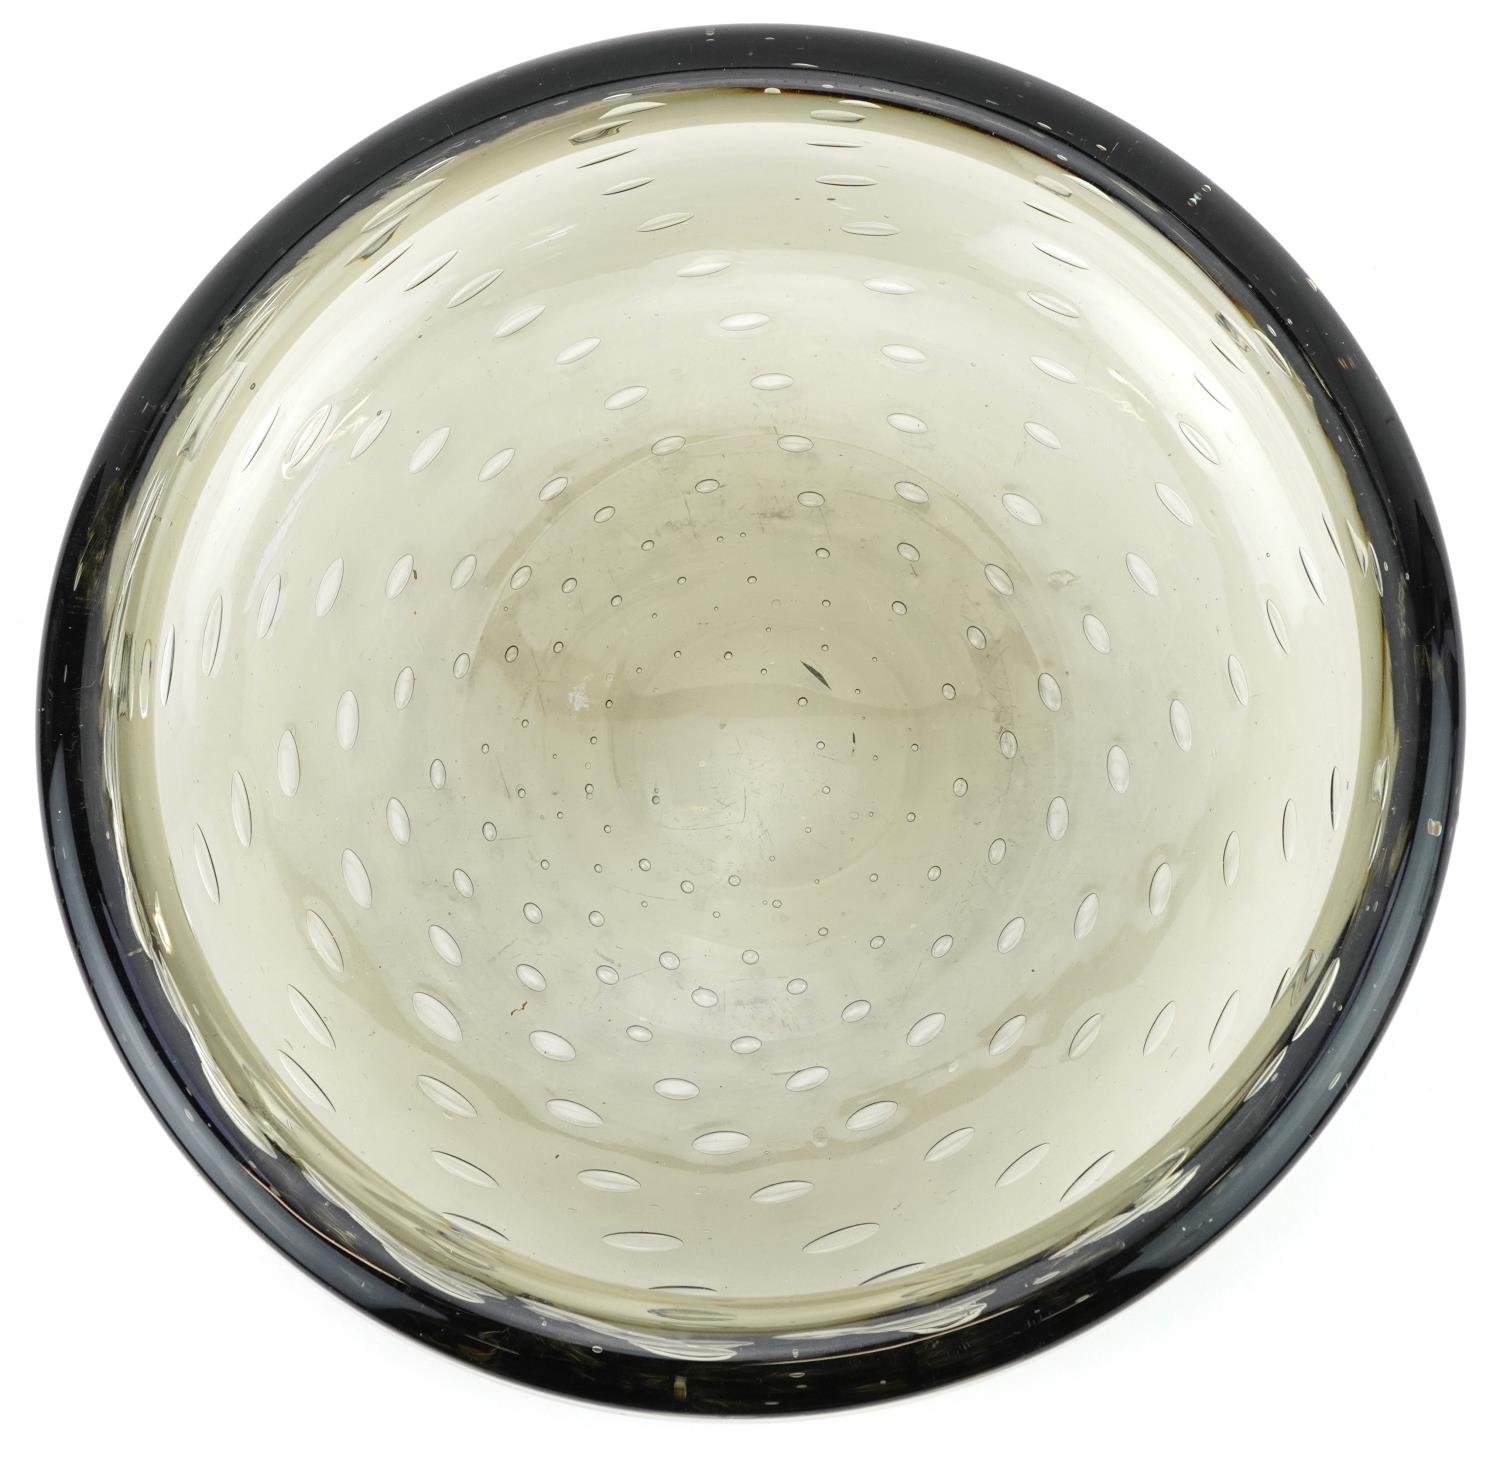 Geoffrey Baxter for Whitefriars, mid century centre bowl with controlled bubbles, 25cm in diameter - Image 3 of 4